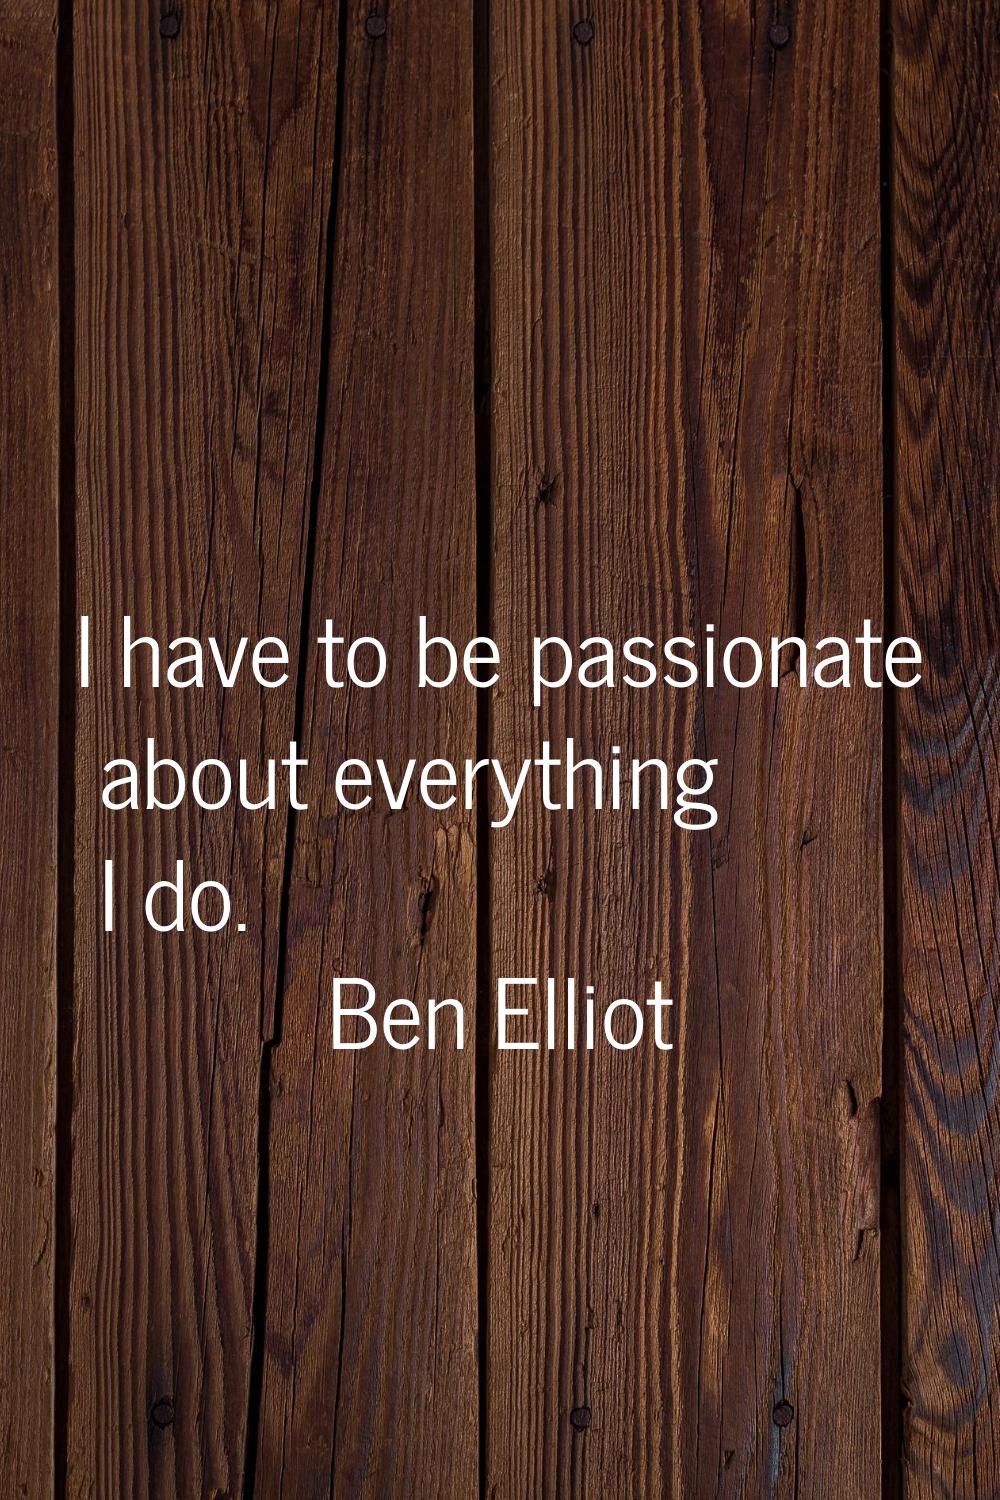 I have to be passionate about everything I do.